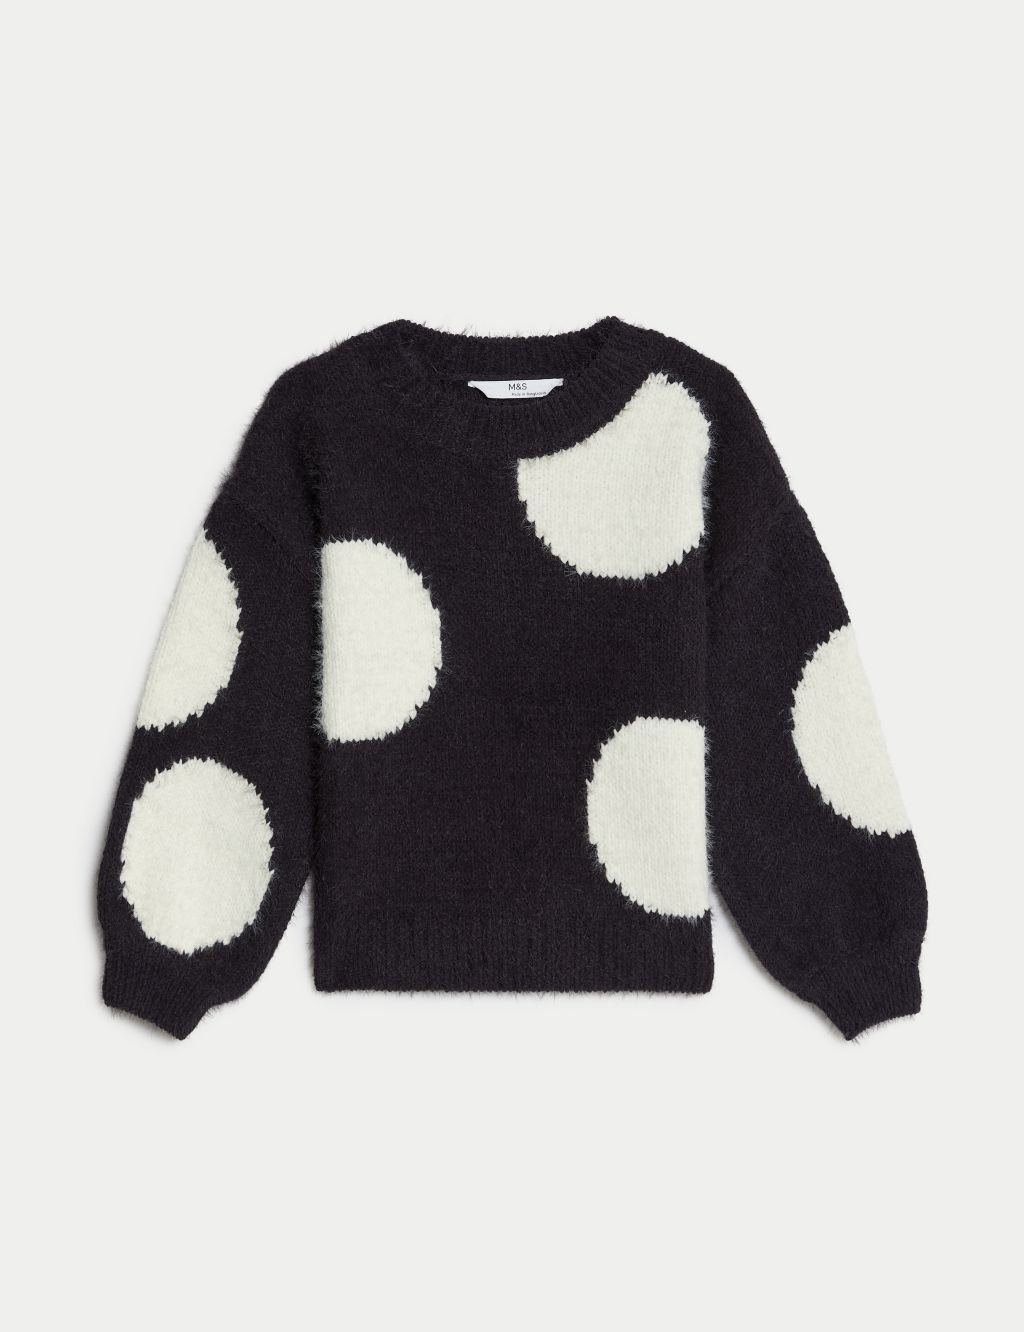 Knitted Spotted Jumper (2-8 Yrs) image 2